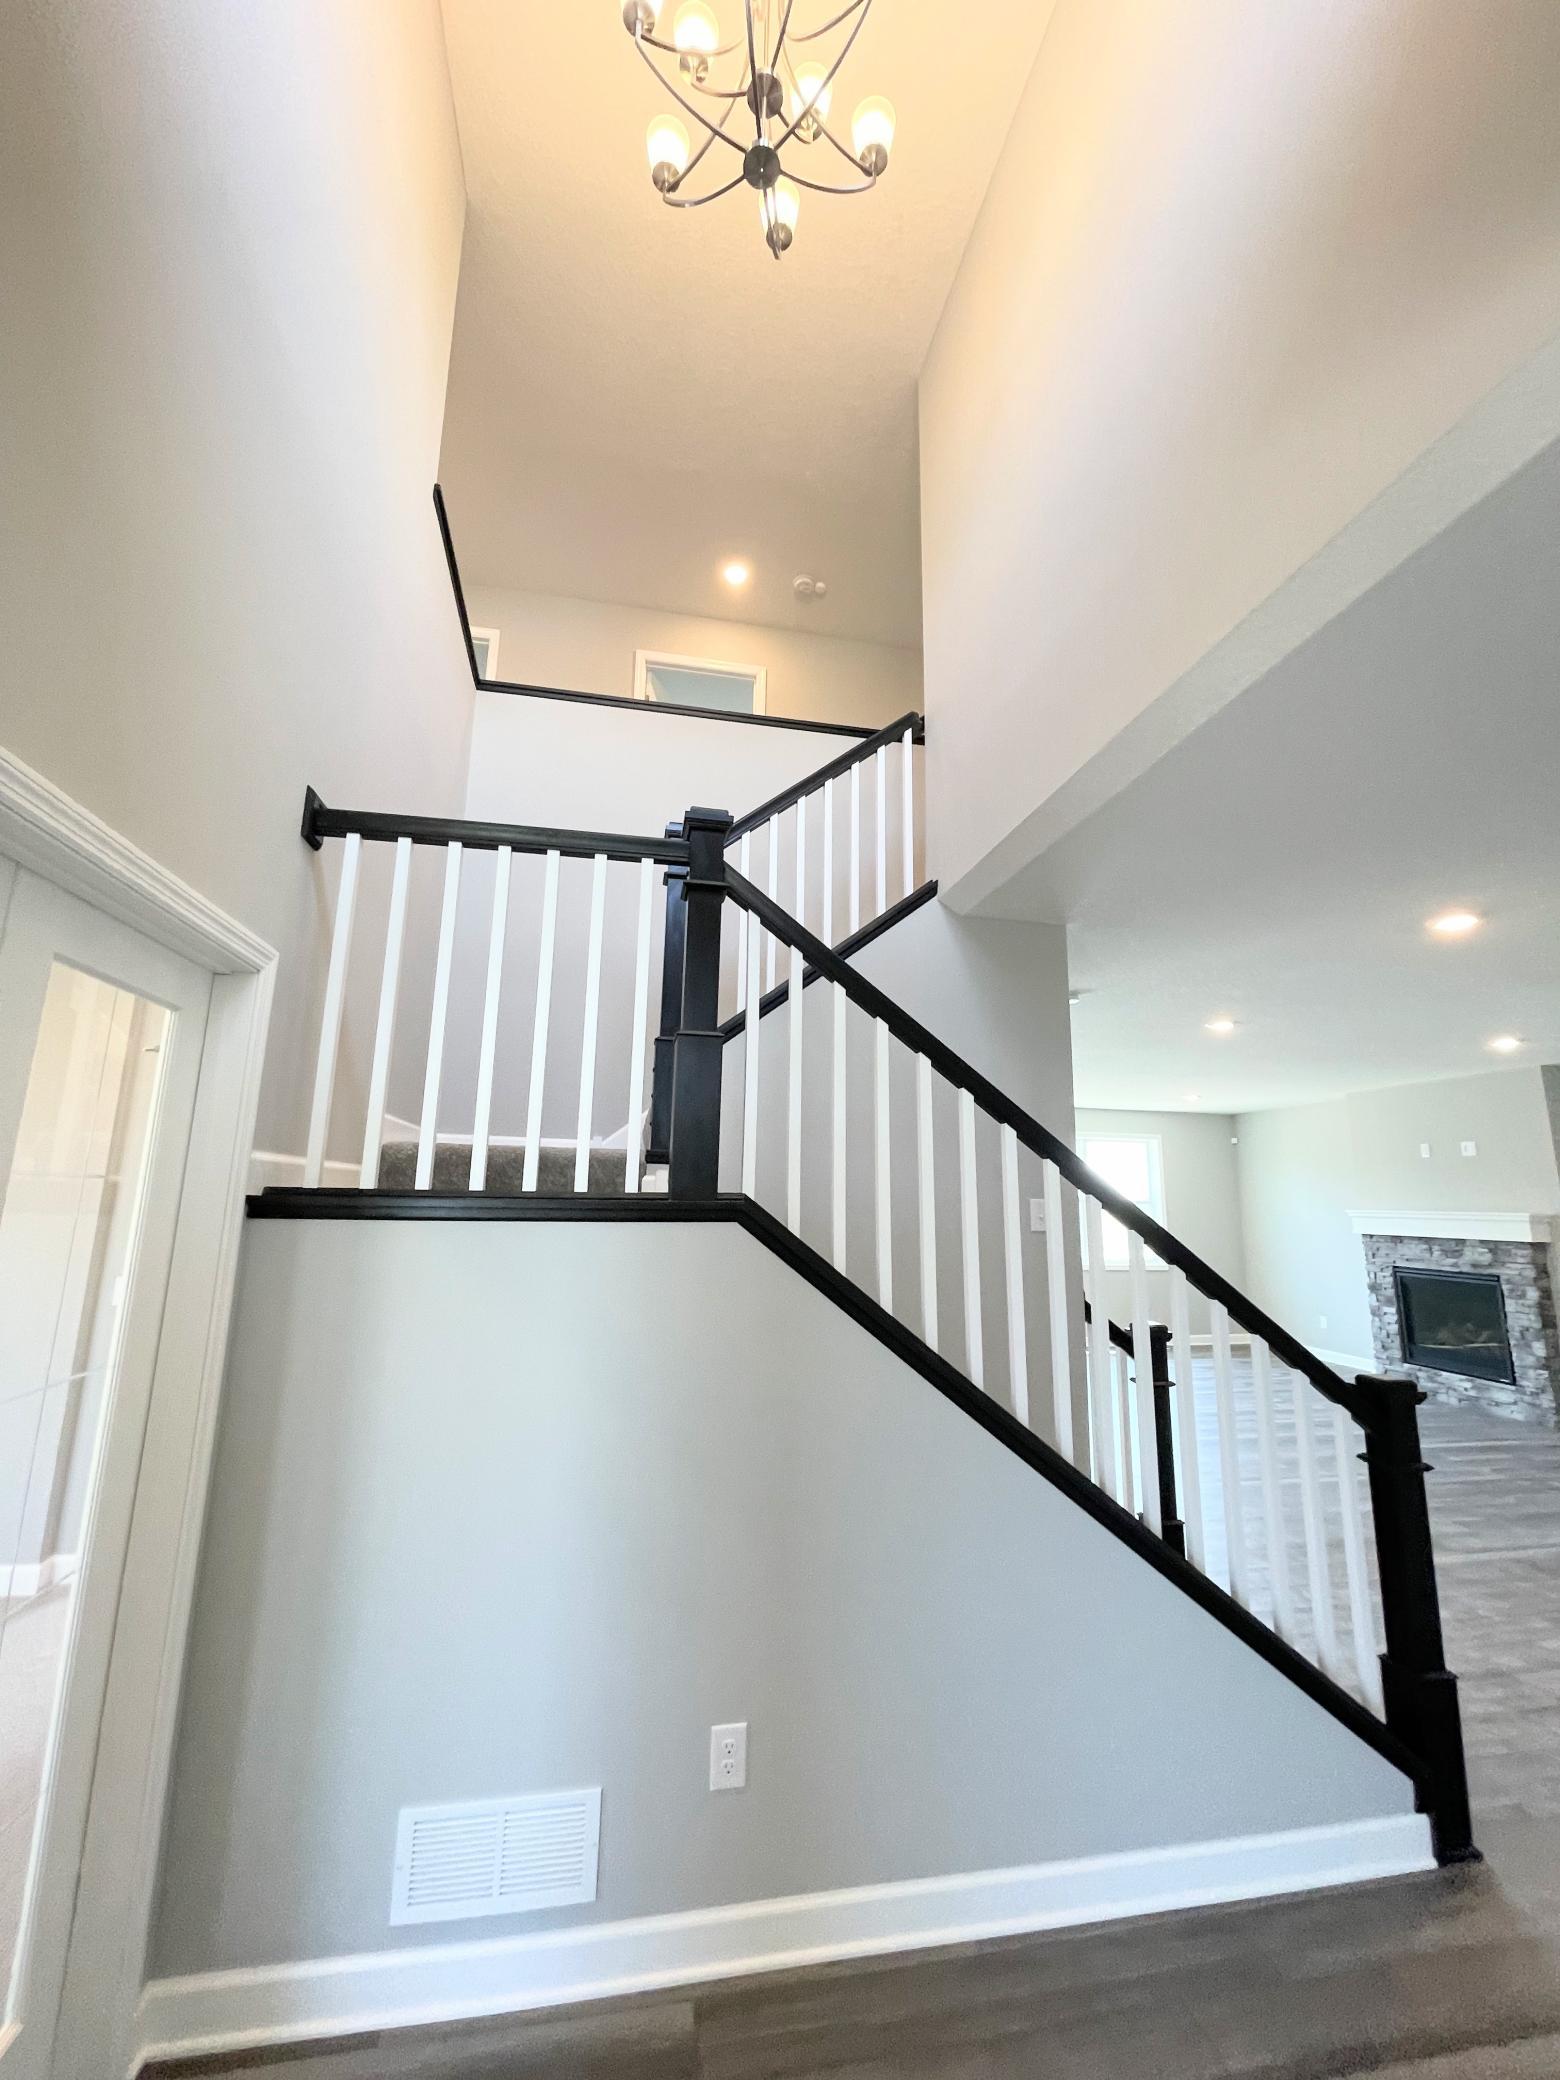 The 2-story foyer provides a light and airy space at your front entry. Photos are of the actual home.